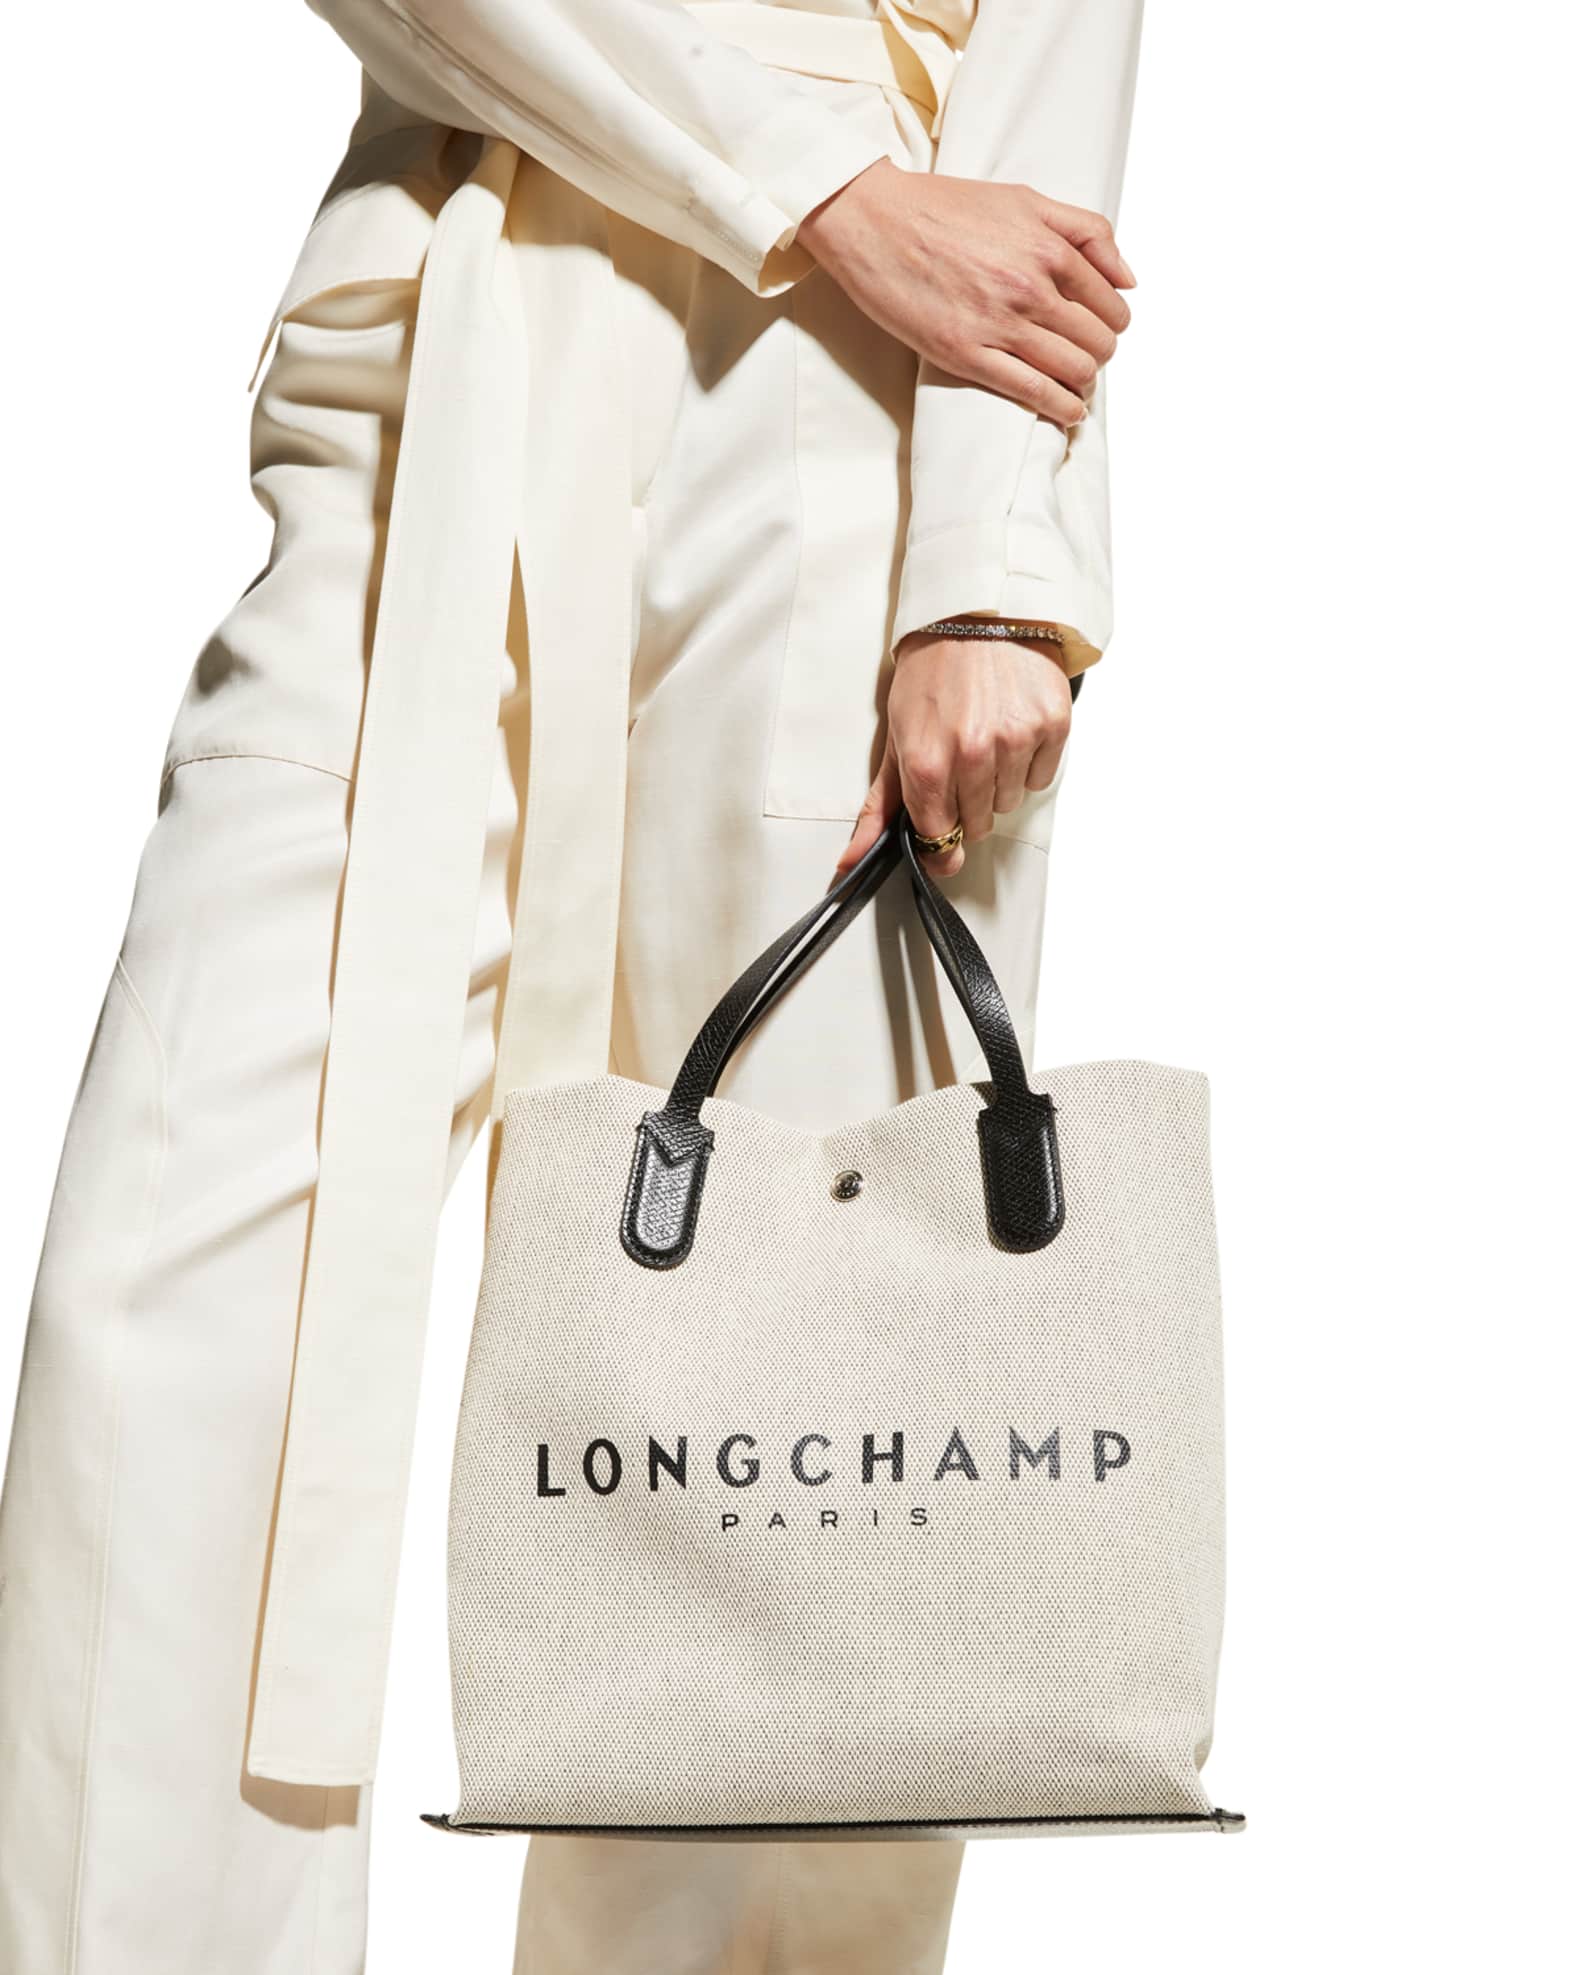 LONGCHAMP ESSENTIAL TOILE CANVAS TOTE + WHAT'S IN MY TRAVEL BAG